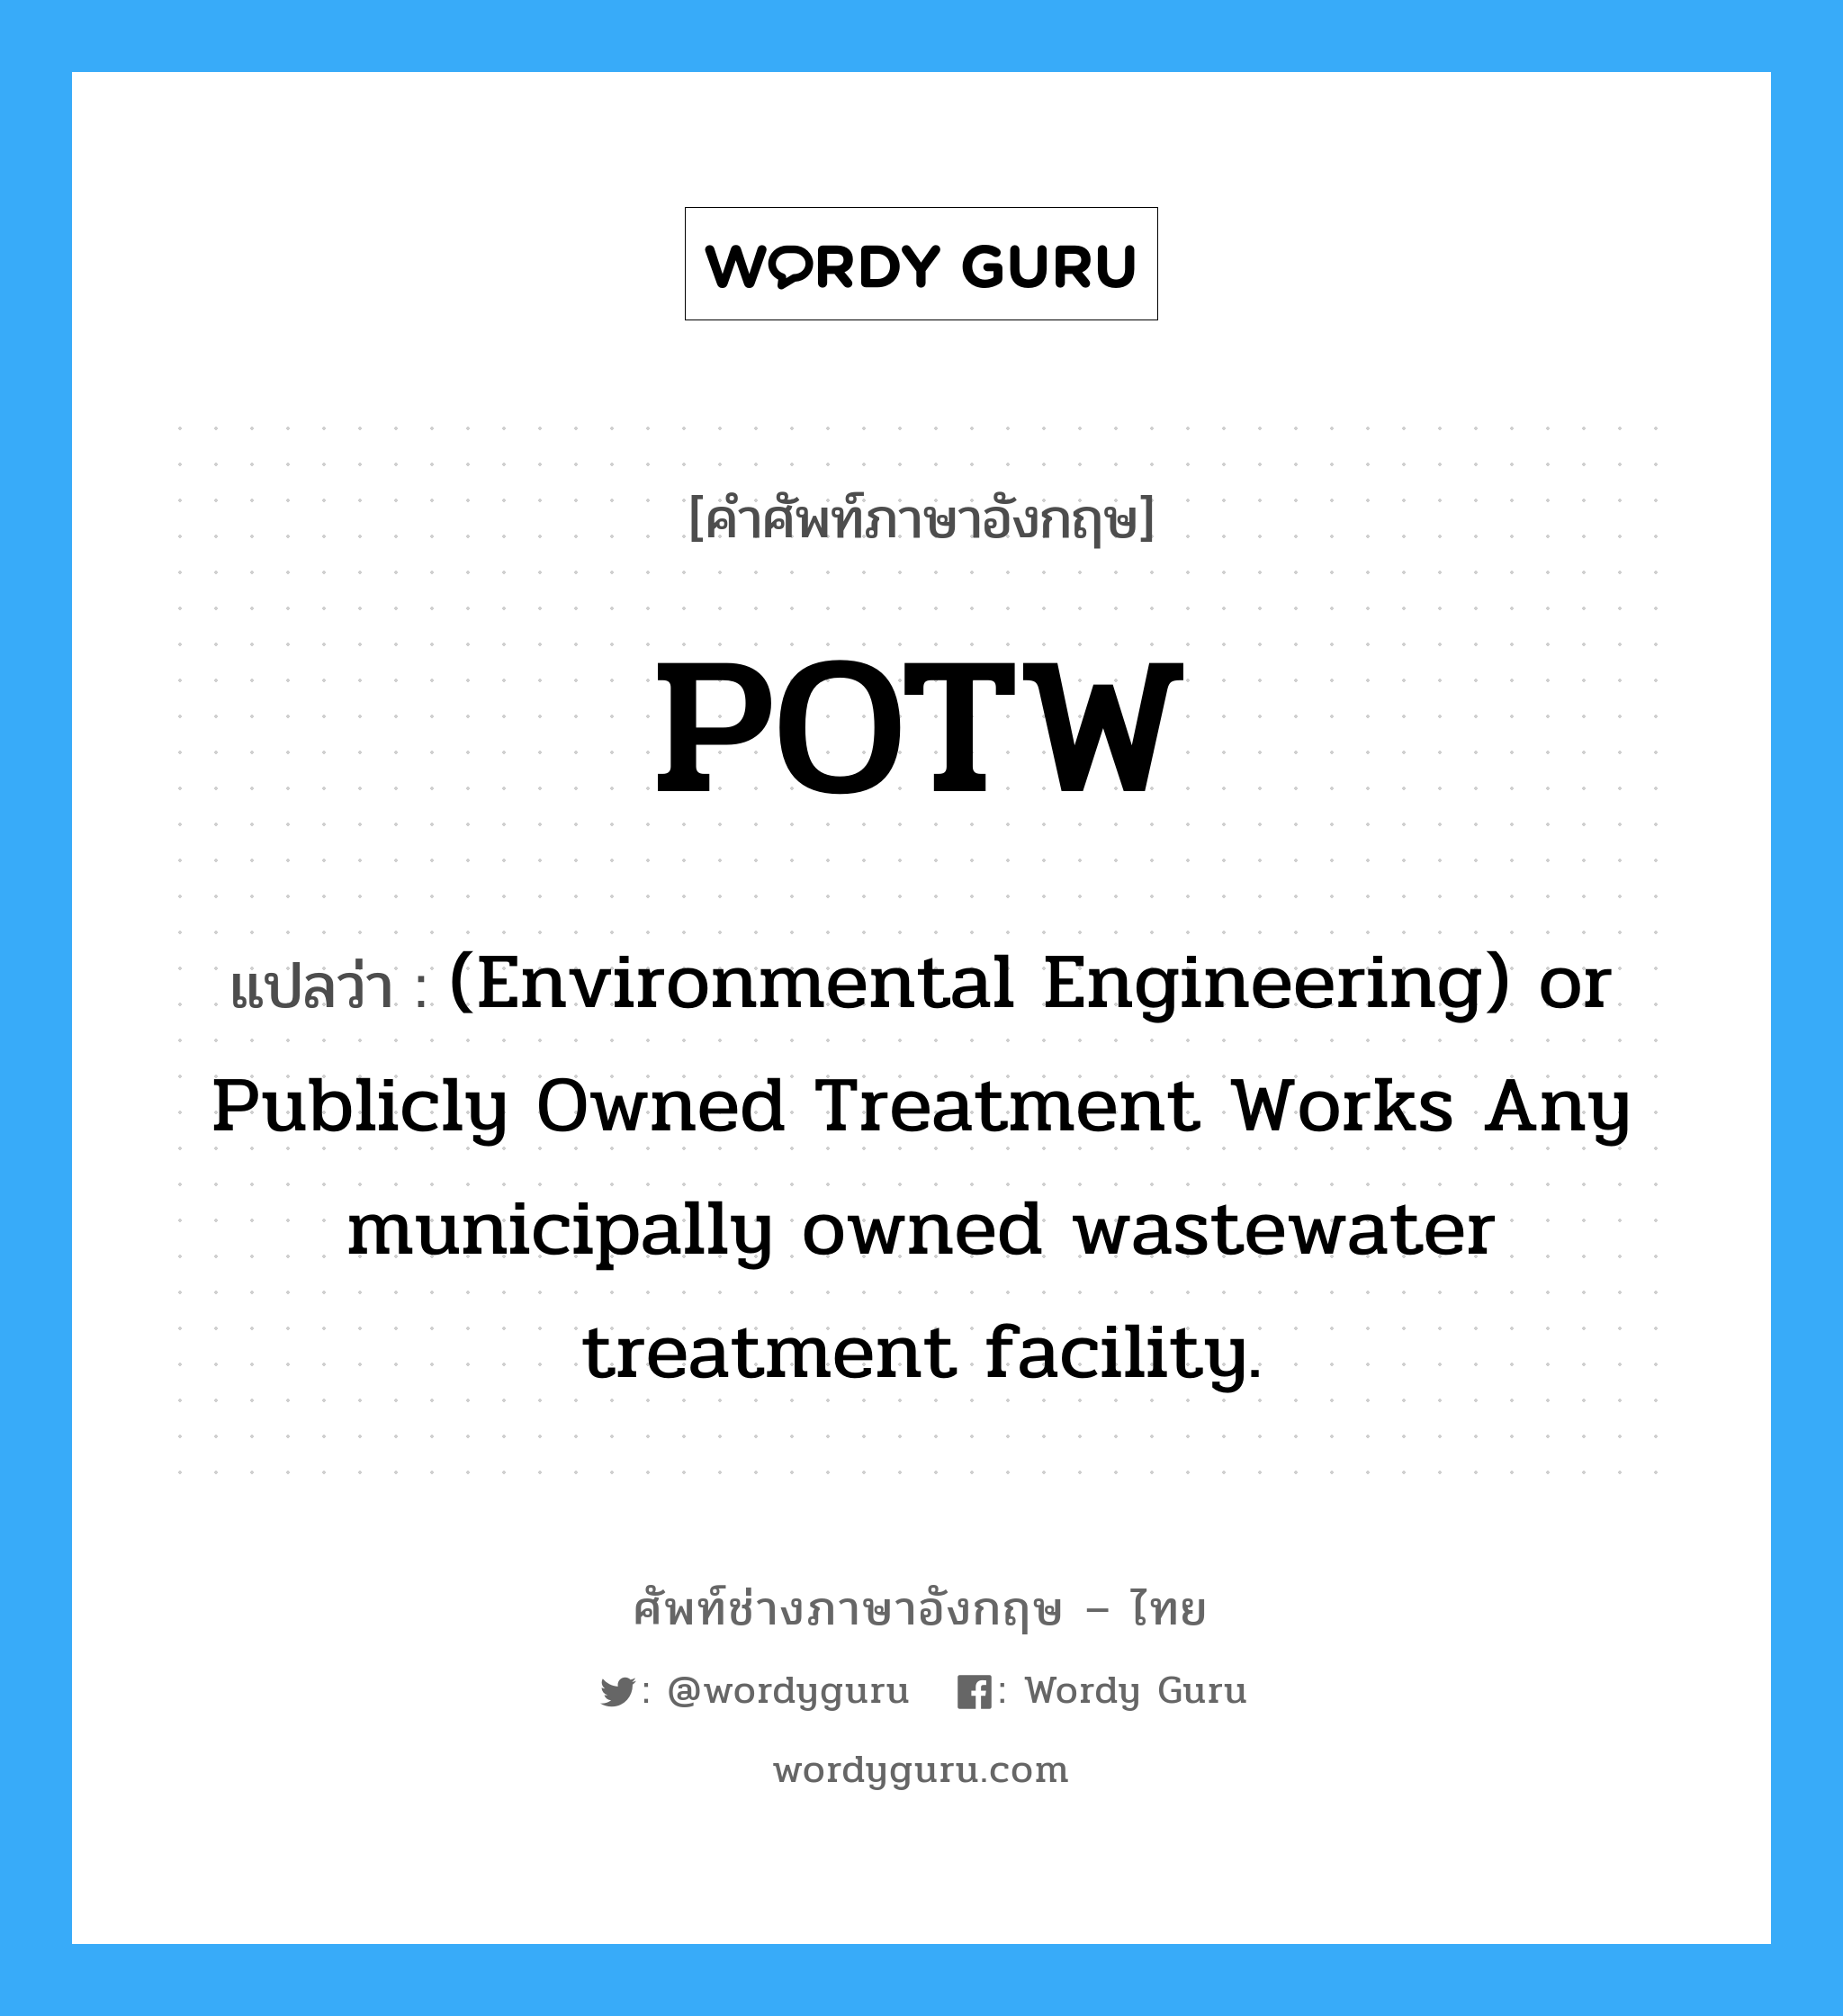 (Environmental Engineering) or Publicly Owned Treatment Works Any municipally owned wastewater treatment facility. ภาษาอังกฤษ?, คำศัพท์ช่างภาษาอังกฤษ - ไทย (Environmental Engineering) or Publicly Owned Treatment Works Any municipally owned wastewater treatment facility. คำศัพท์ภาษาอังกฤษ (Environmental Engineering) or Publicly Owned Treatment Works Any municipally owned wastewater treatment facility. แปลว่า POTW